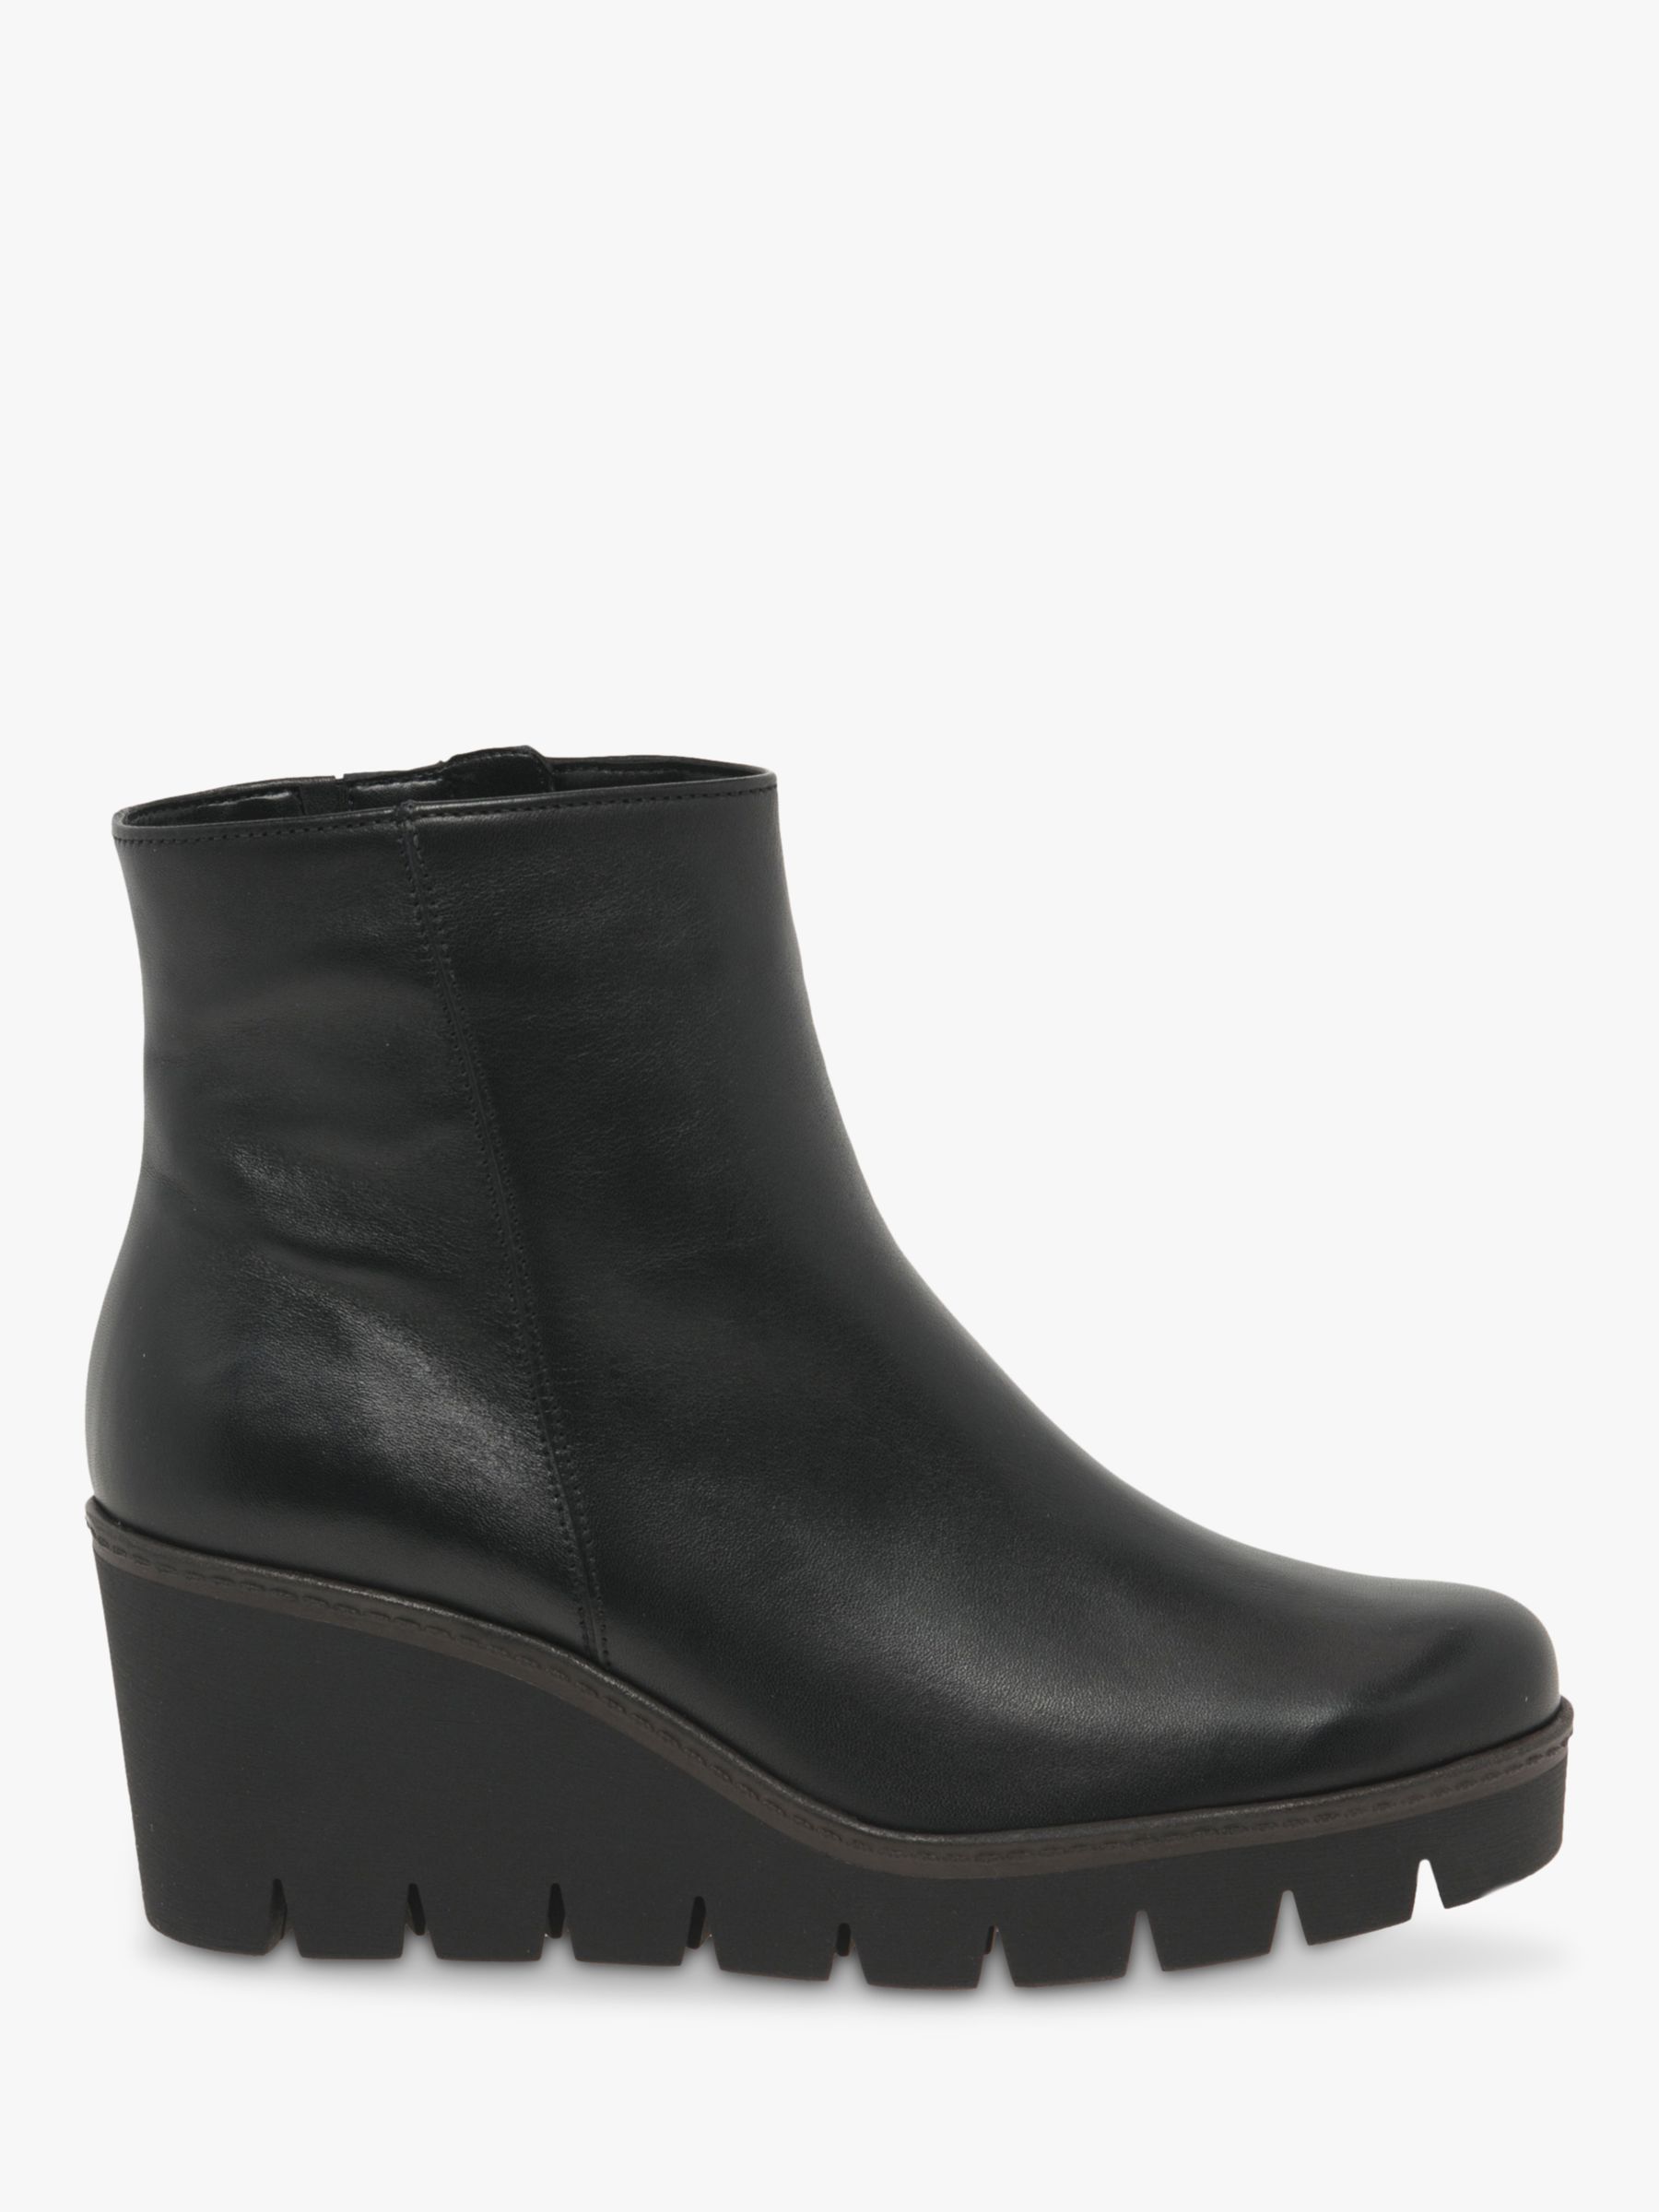 Utopia Leather Wedge Boots, Black at John Lewis & Partners